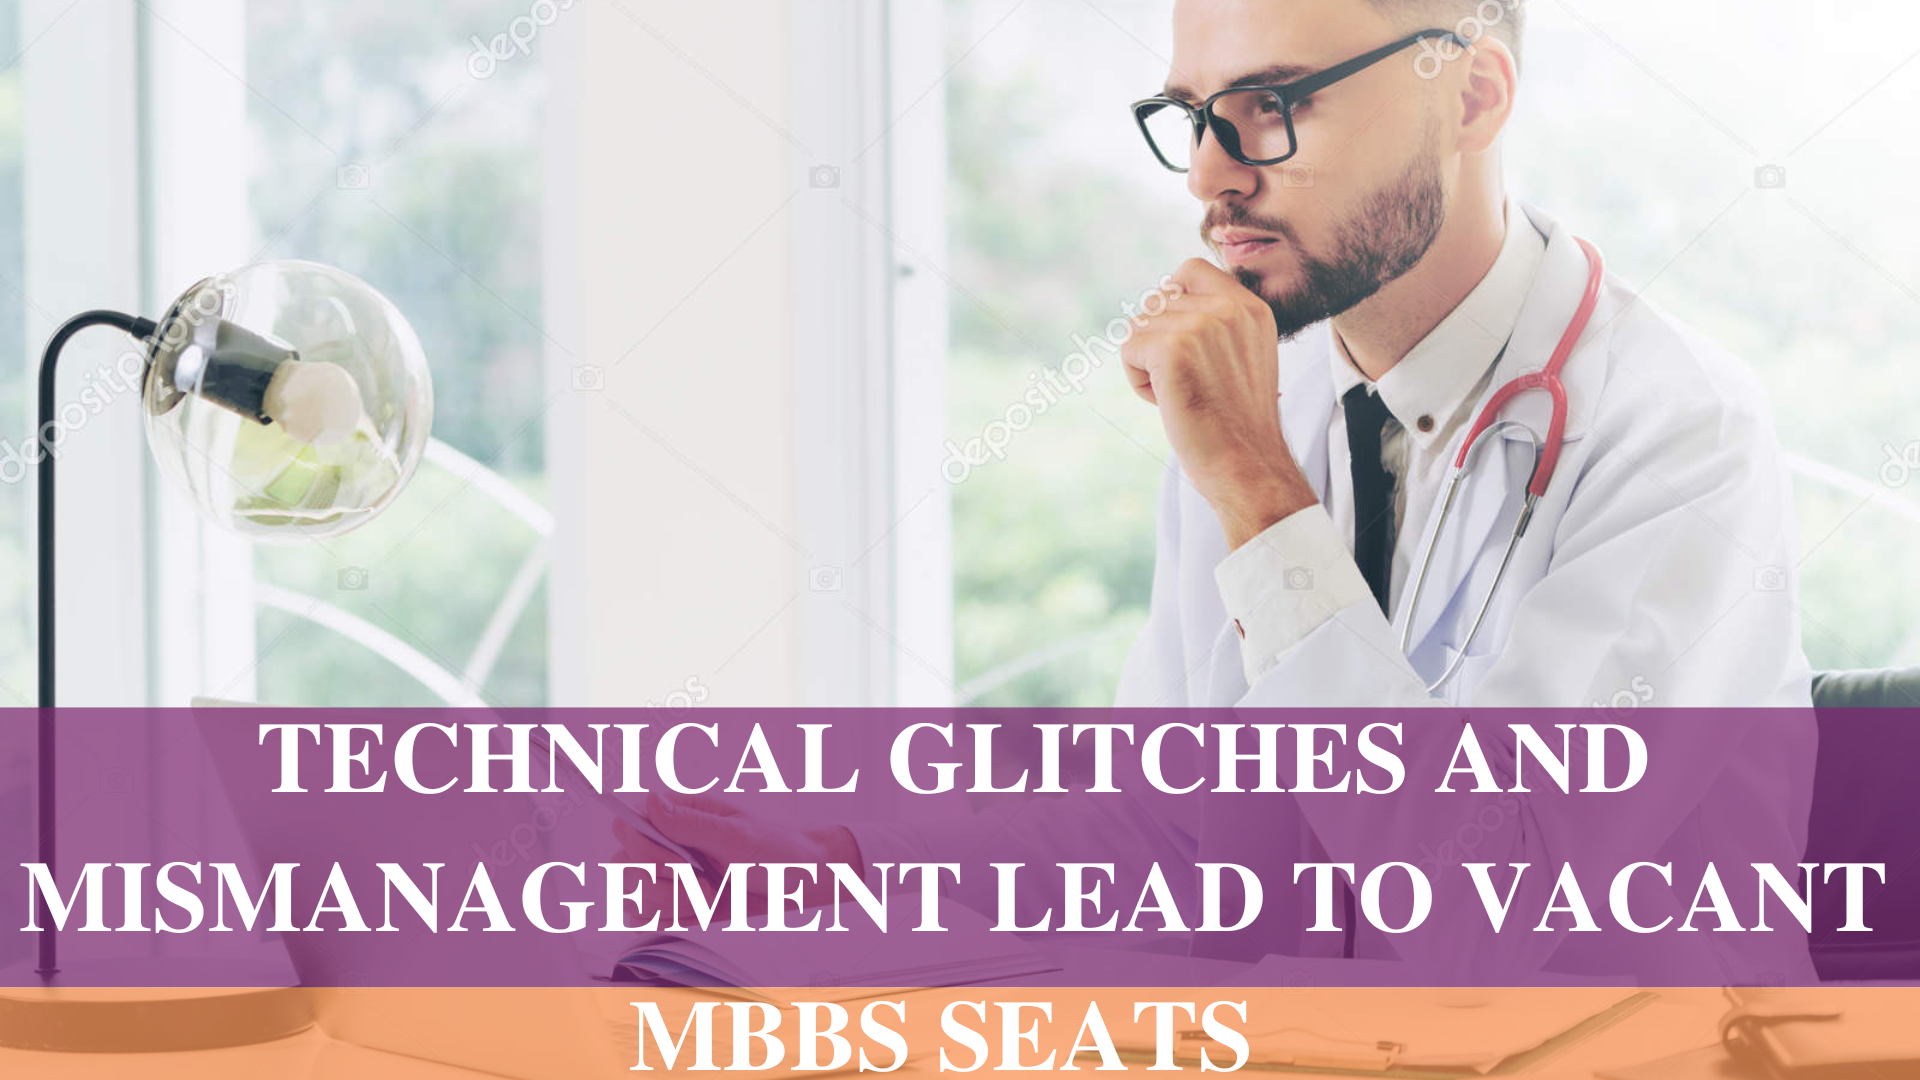 TECHNICAL GLITCHES AND MISMANAGEMENT LEAD TO VACANT MBBS SEATS